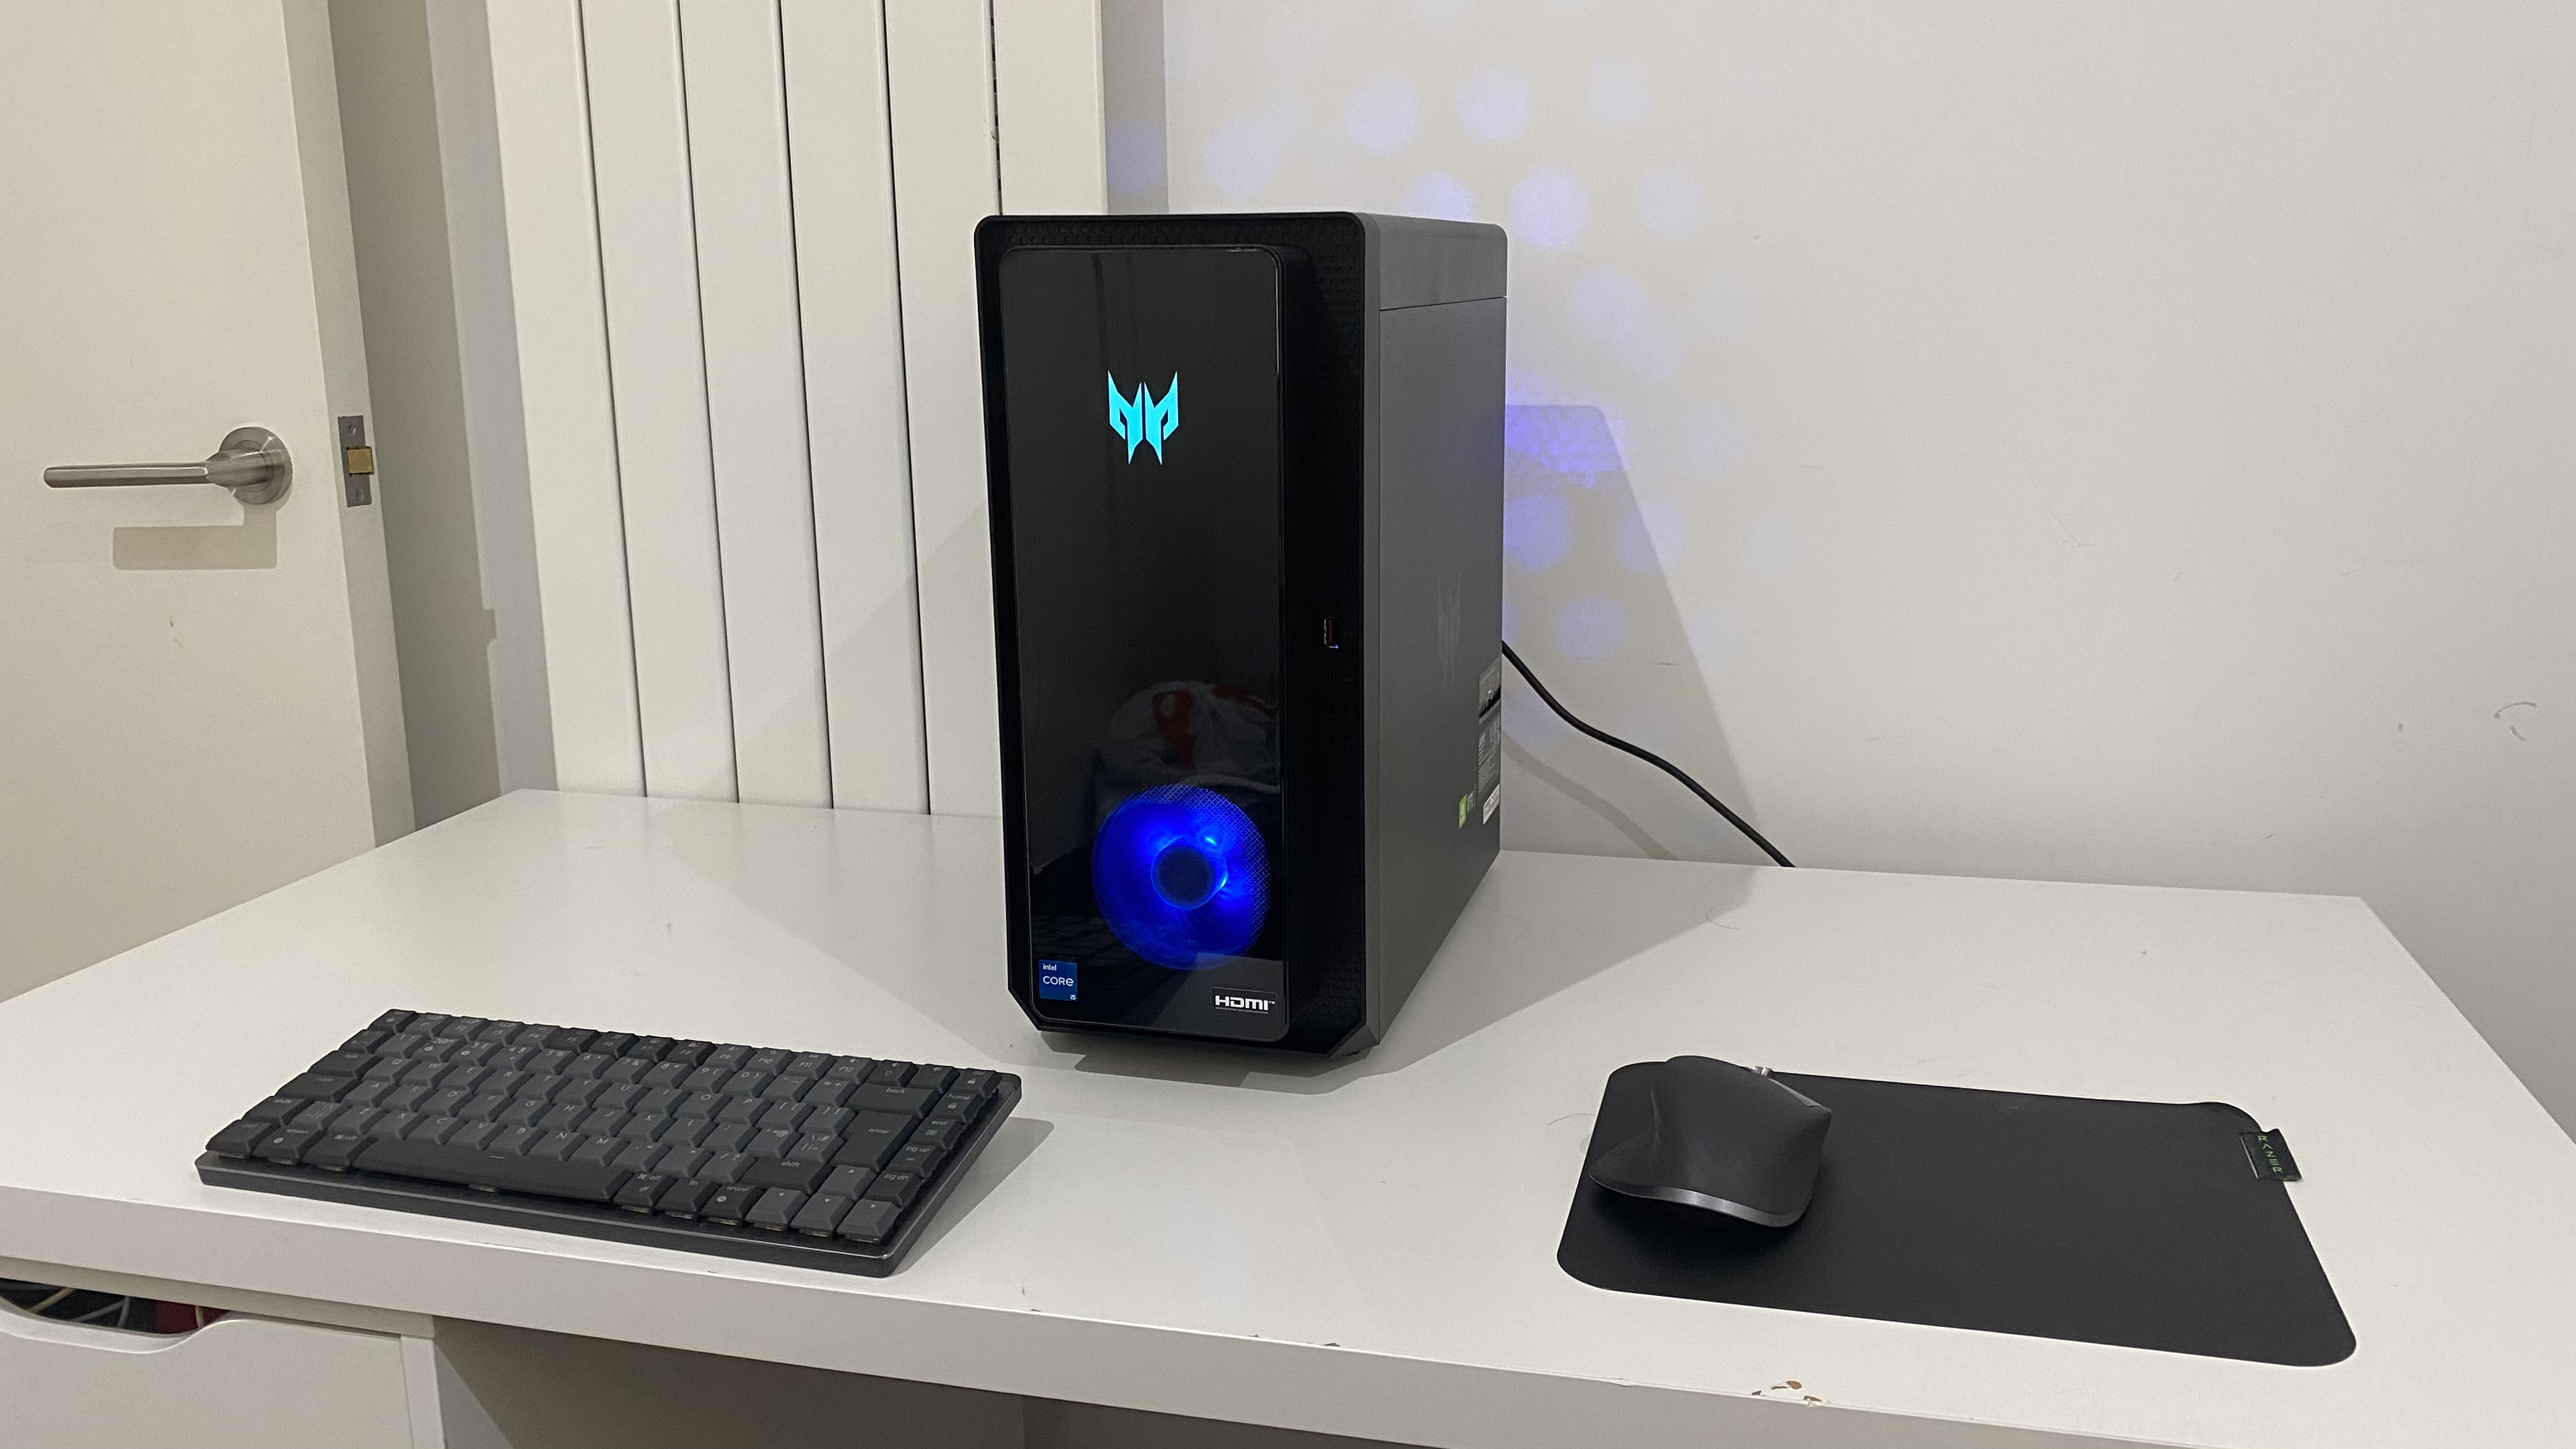 Acer Predator Orion 3000 desktop gaming PC on a desk with RGB lighting turned on.